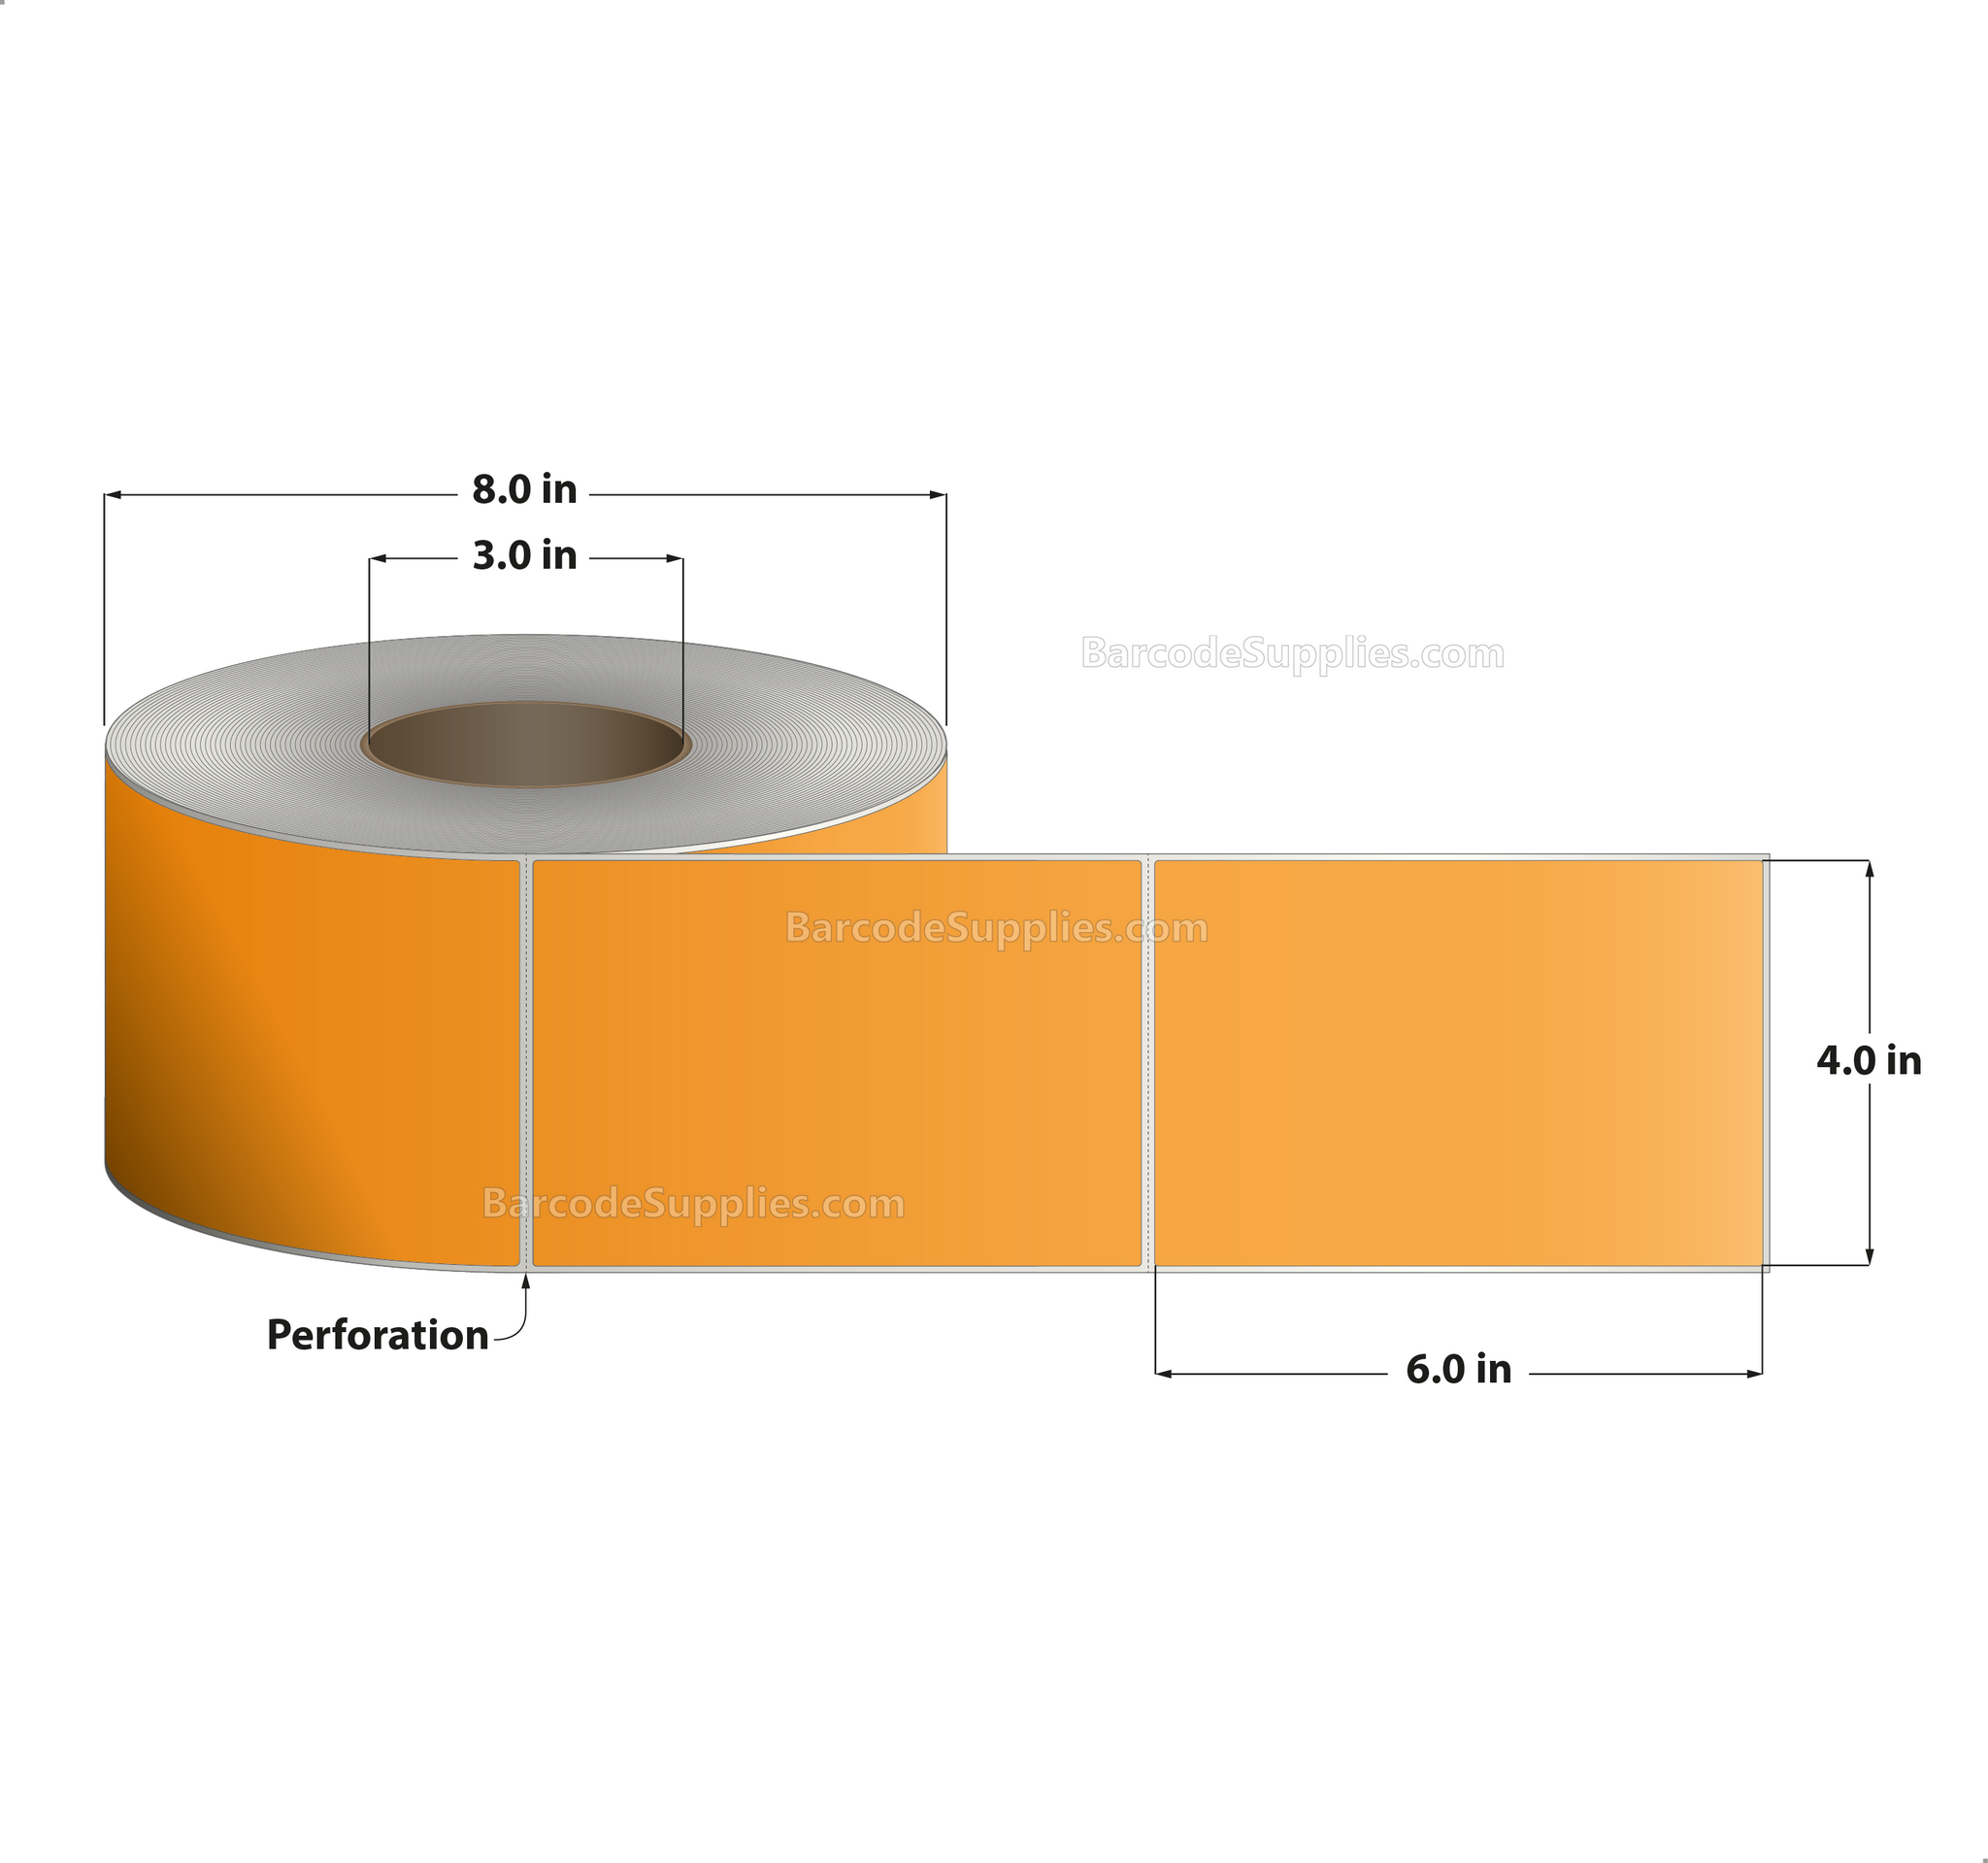 4 x 6 Direct Thermal 136 Orange Labels With Permanent Acrylic Adhesive - Perforated - 1000 Labels Per Roll - Carton Of 4 Rolls - 4000 Labels Total - MPN: DT46-1PO